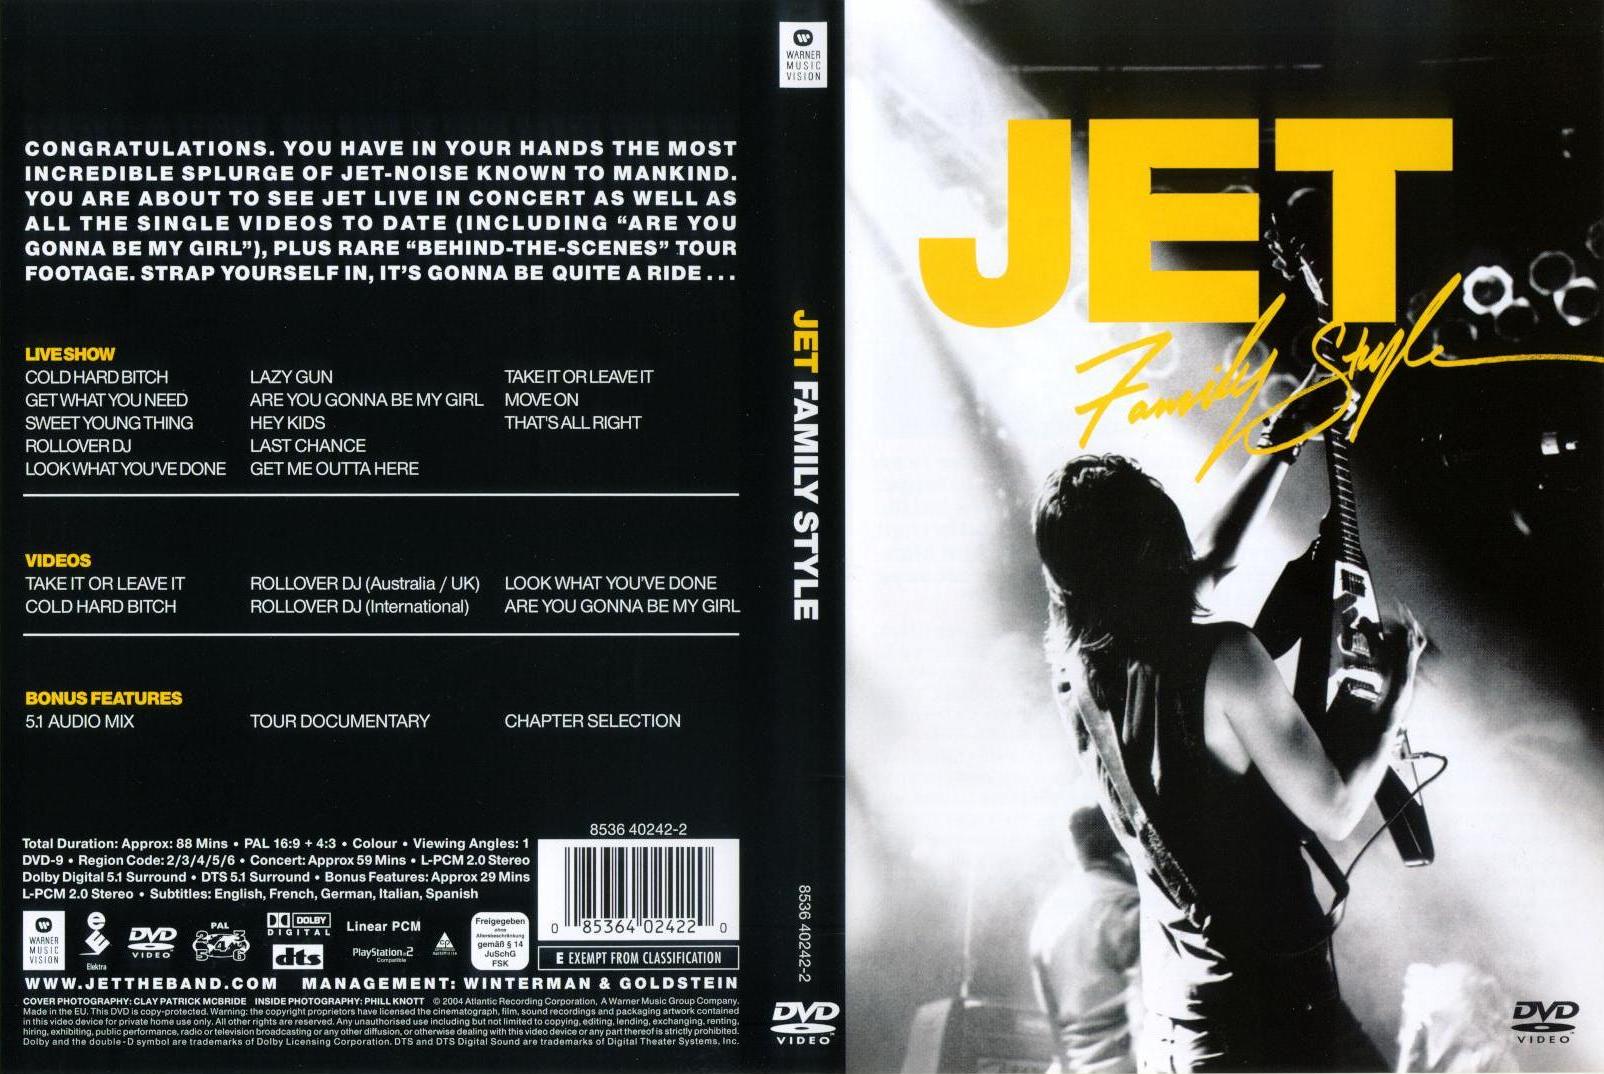 Jaquette DVD Jet family style